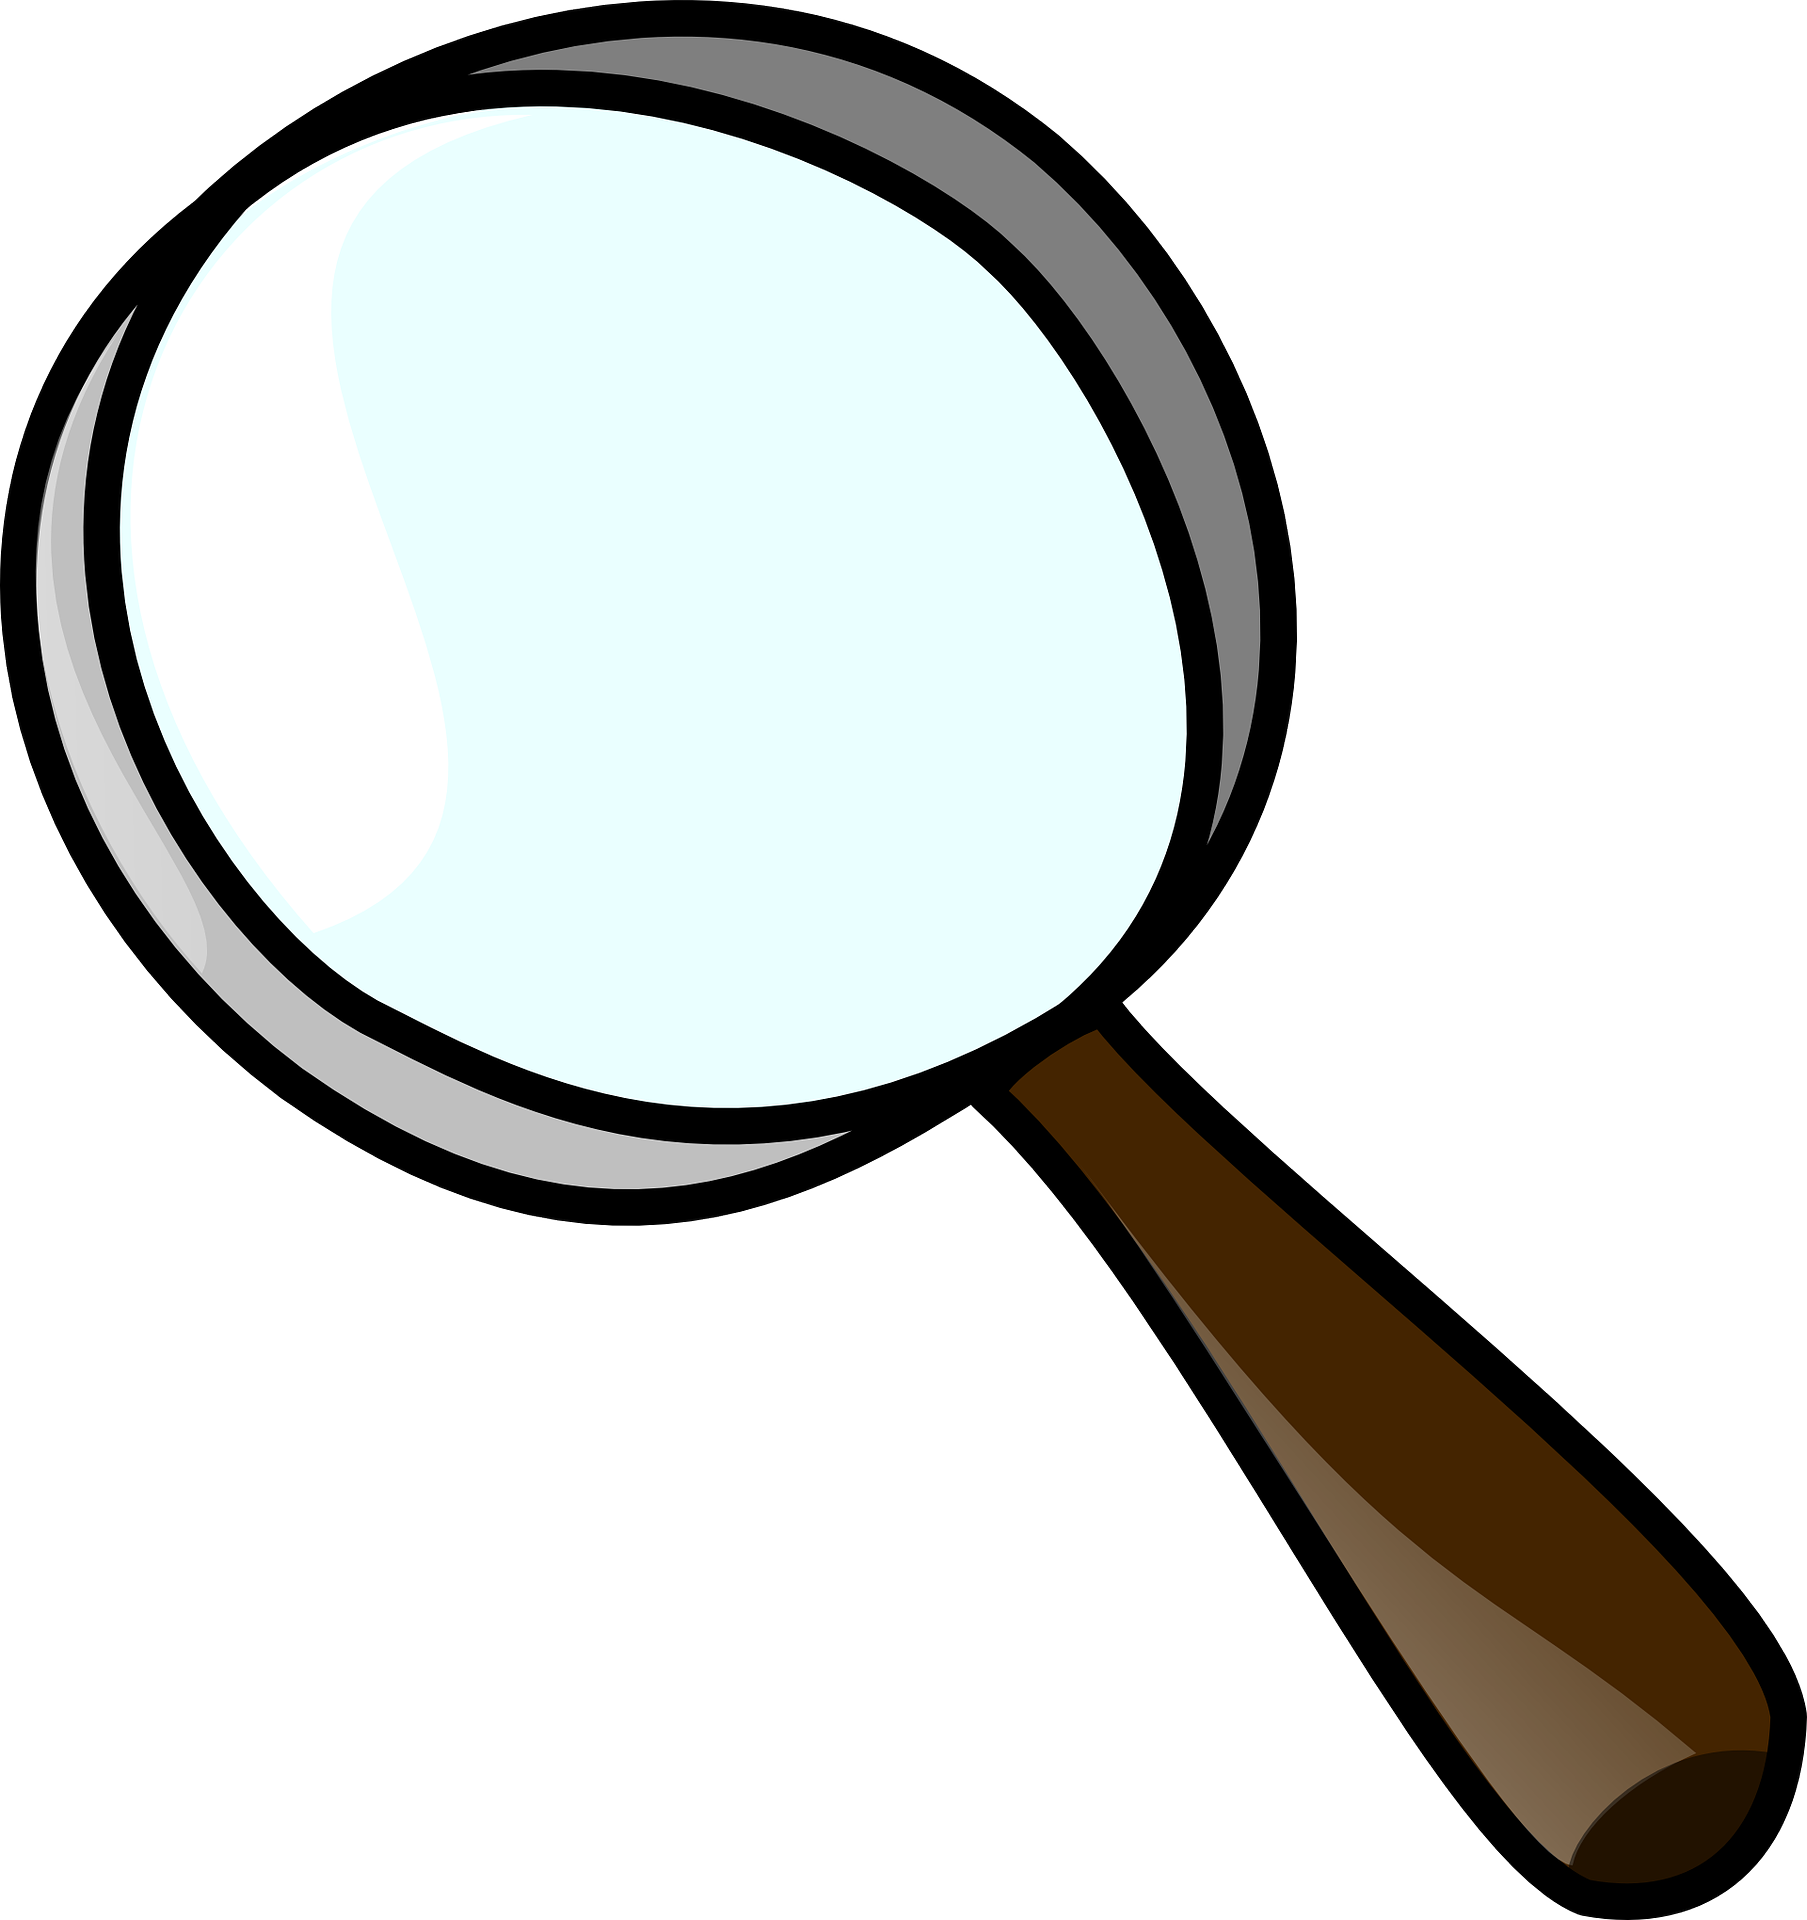 detective clipart magnifying lens